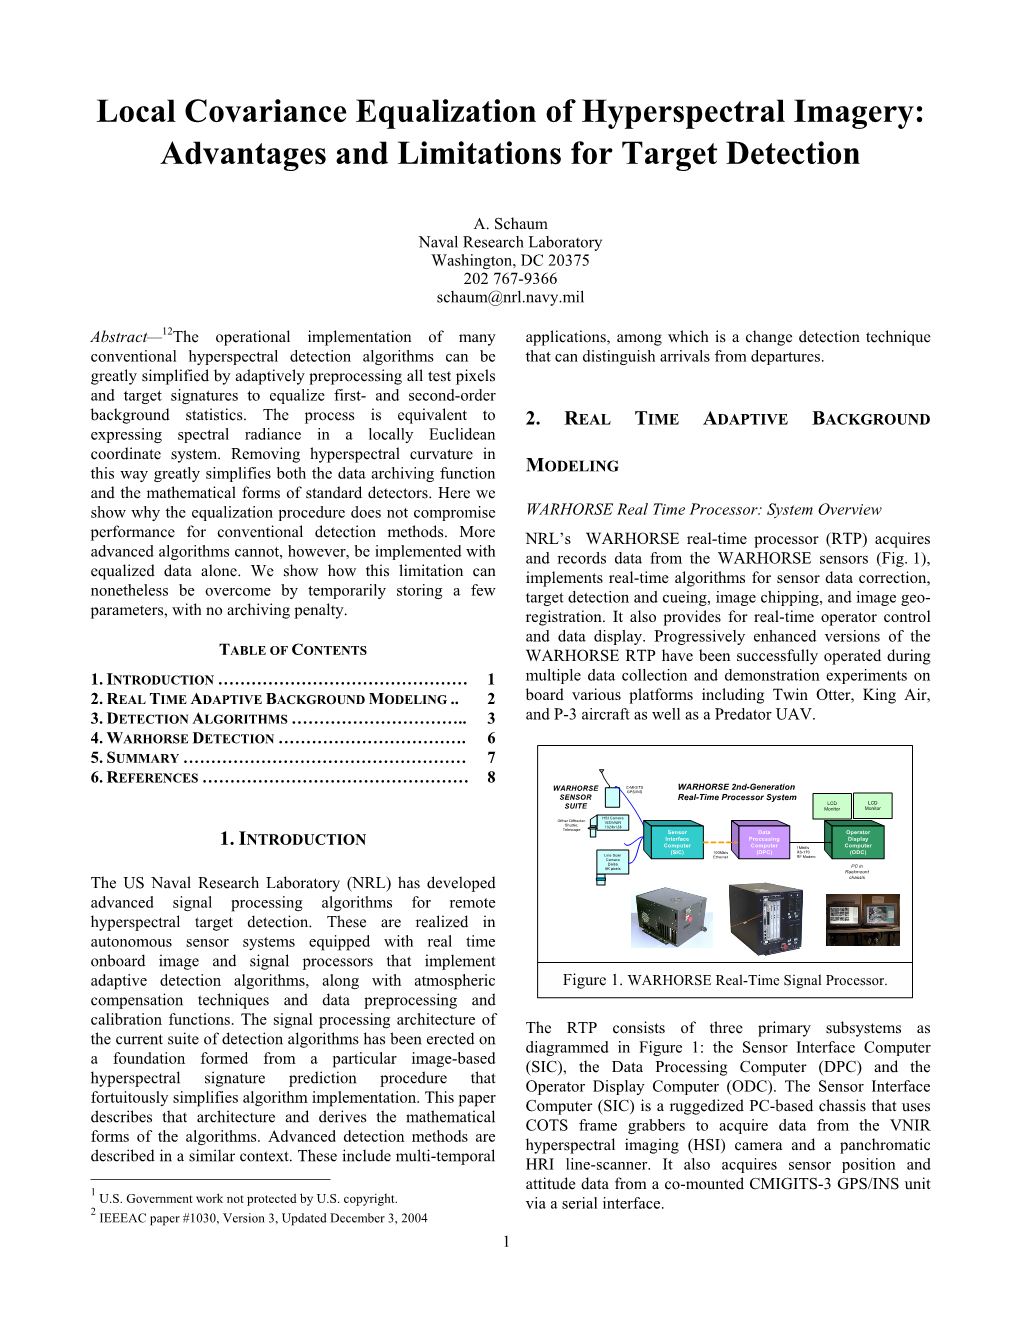 Local Covariance Equalization of Hyperspectral Imagery: Advantages and Limitations for Target Detection